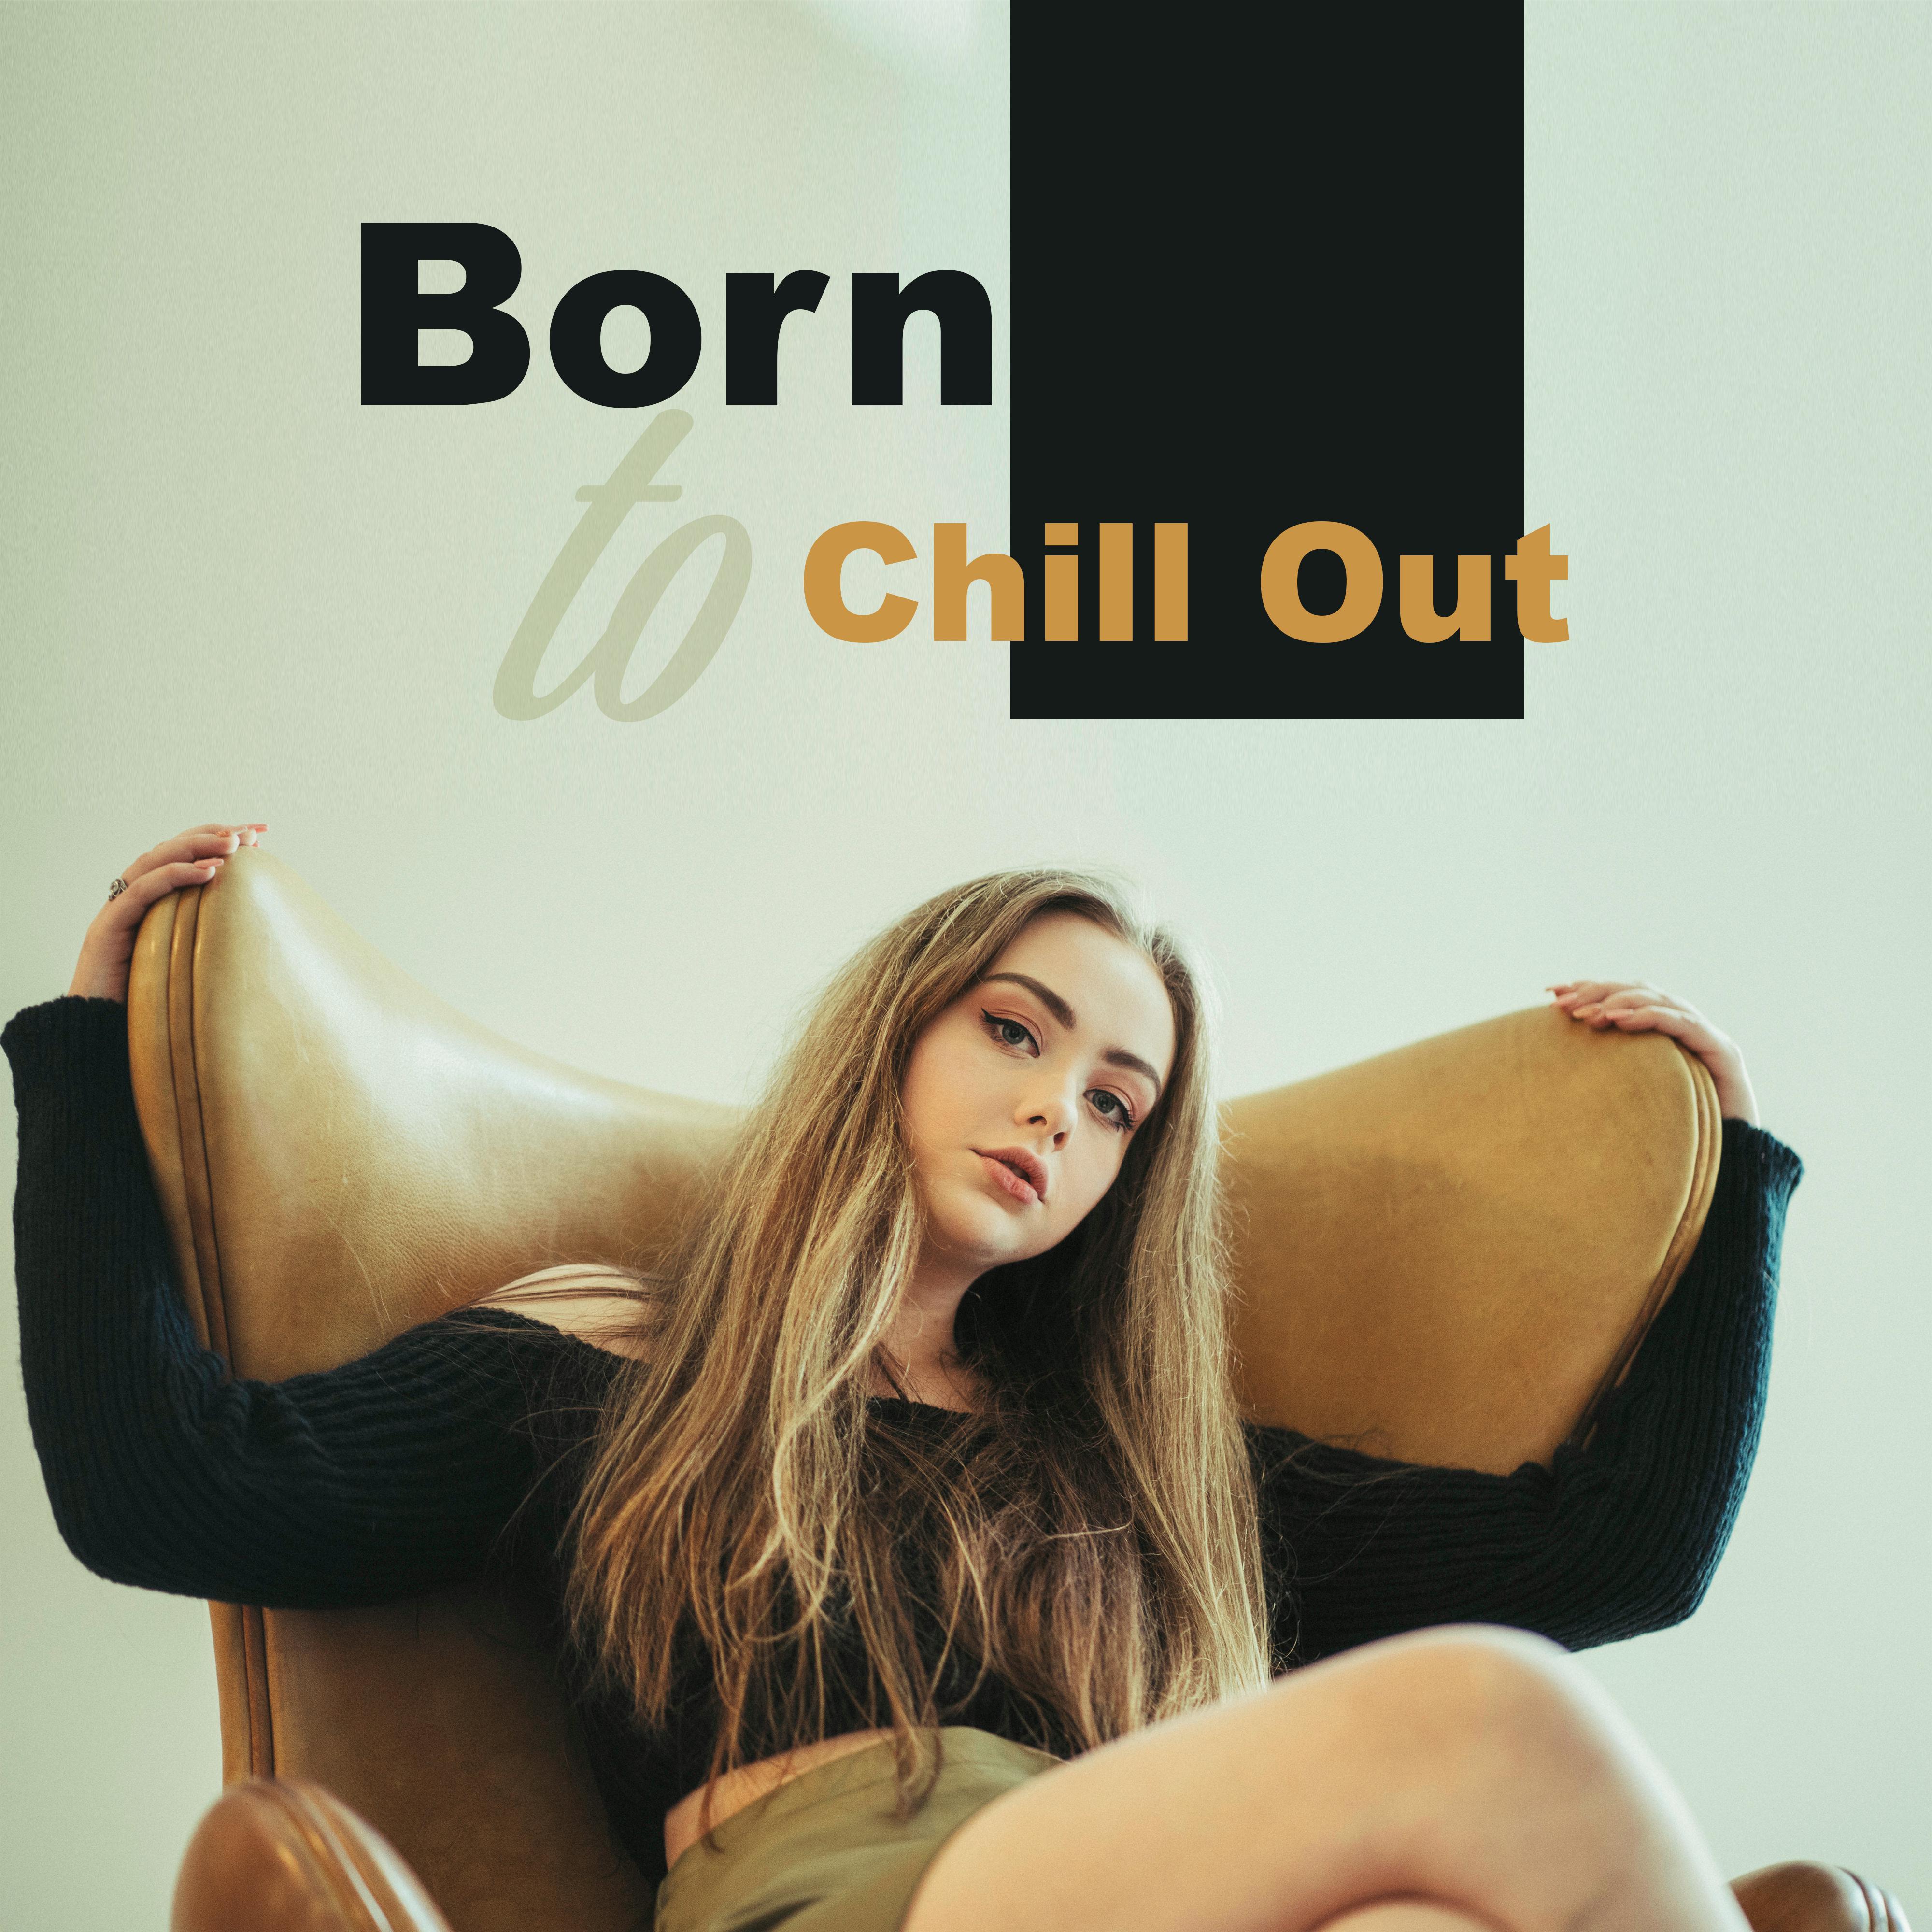 Born to Chill Out